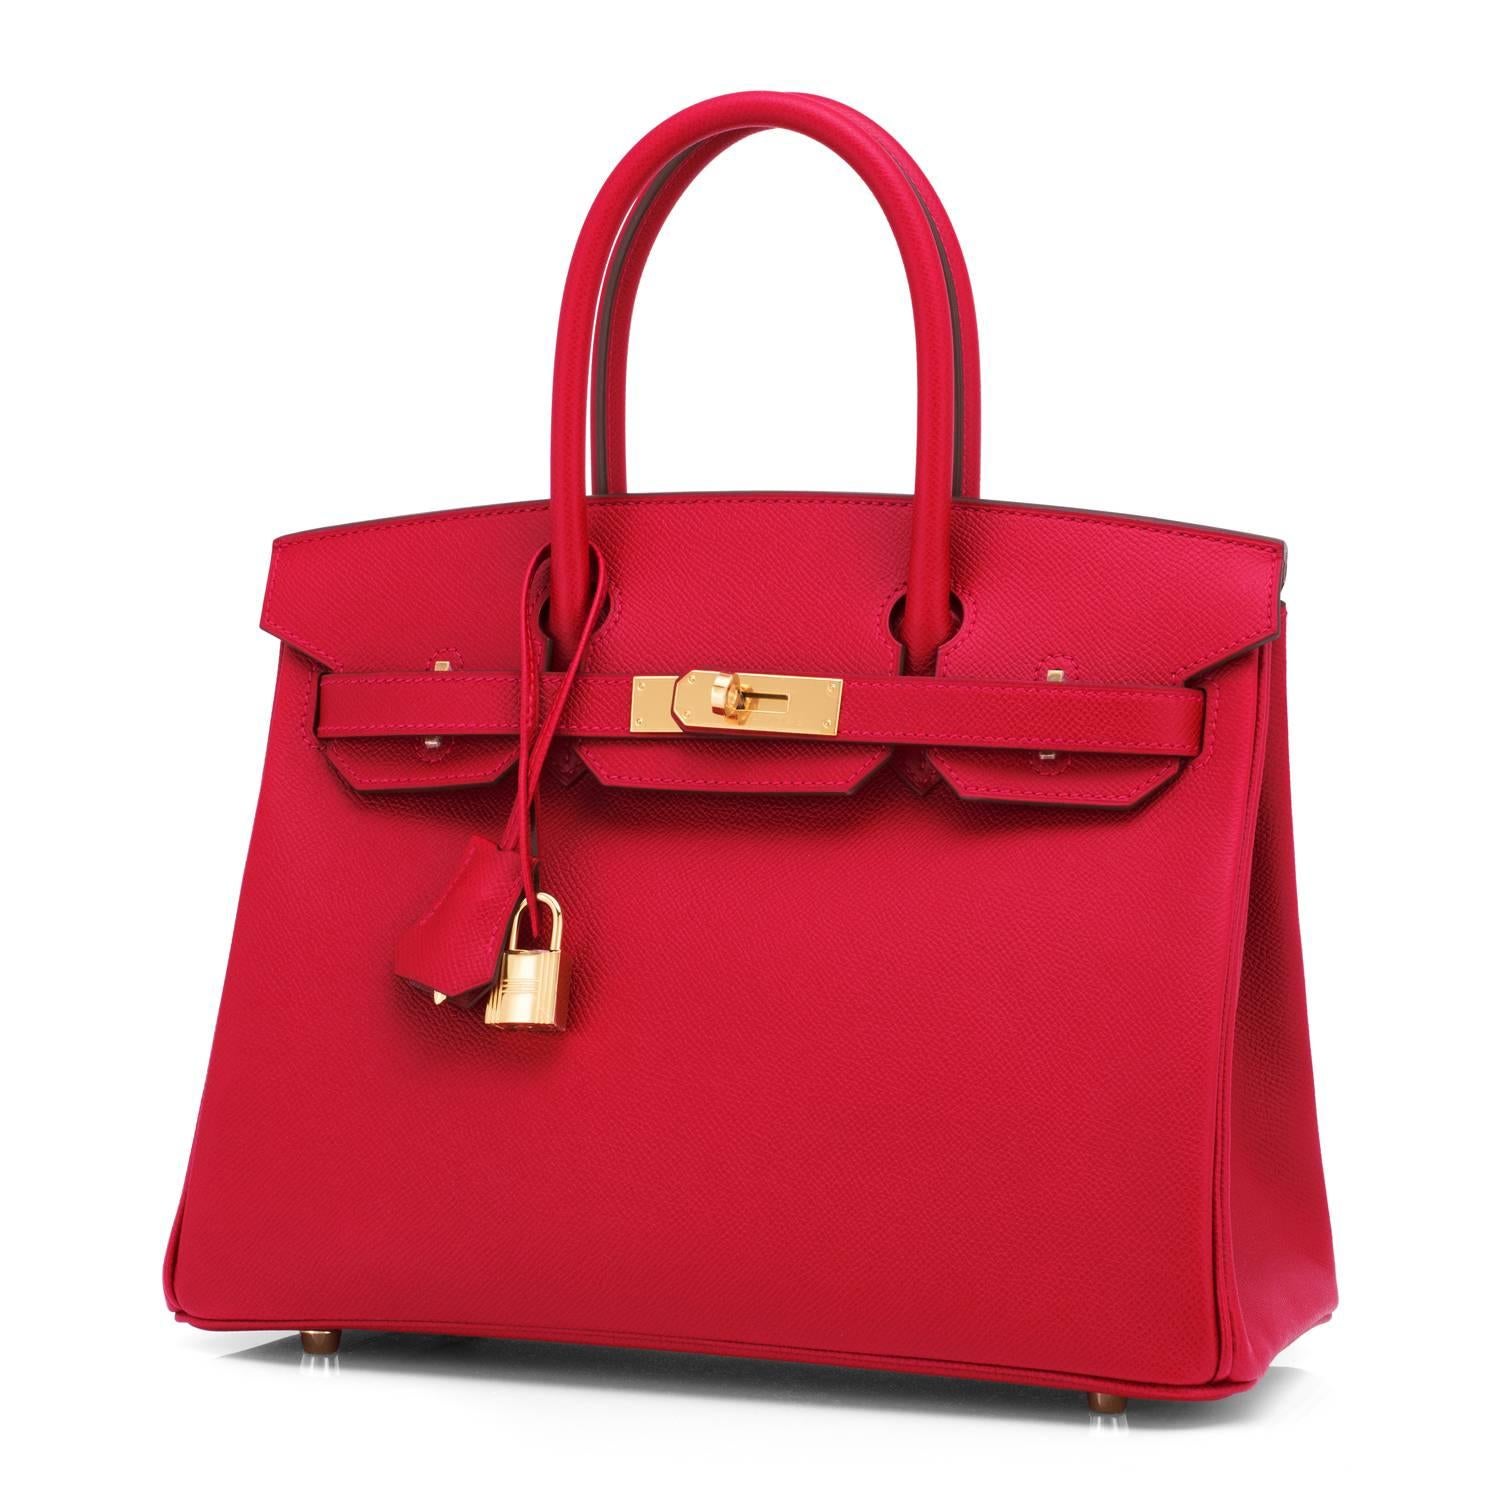 Hermes Rouge Casaque 30cm Birkin Lipstick Red Epsom Gold Hardware
Brand New in Box. Store fresh. Pristine condition (with plastic on hardware).
Perfect gift! Coming full set with keys, lock, clochette, a sleeper for the bag, rain protector, and